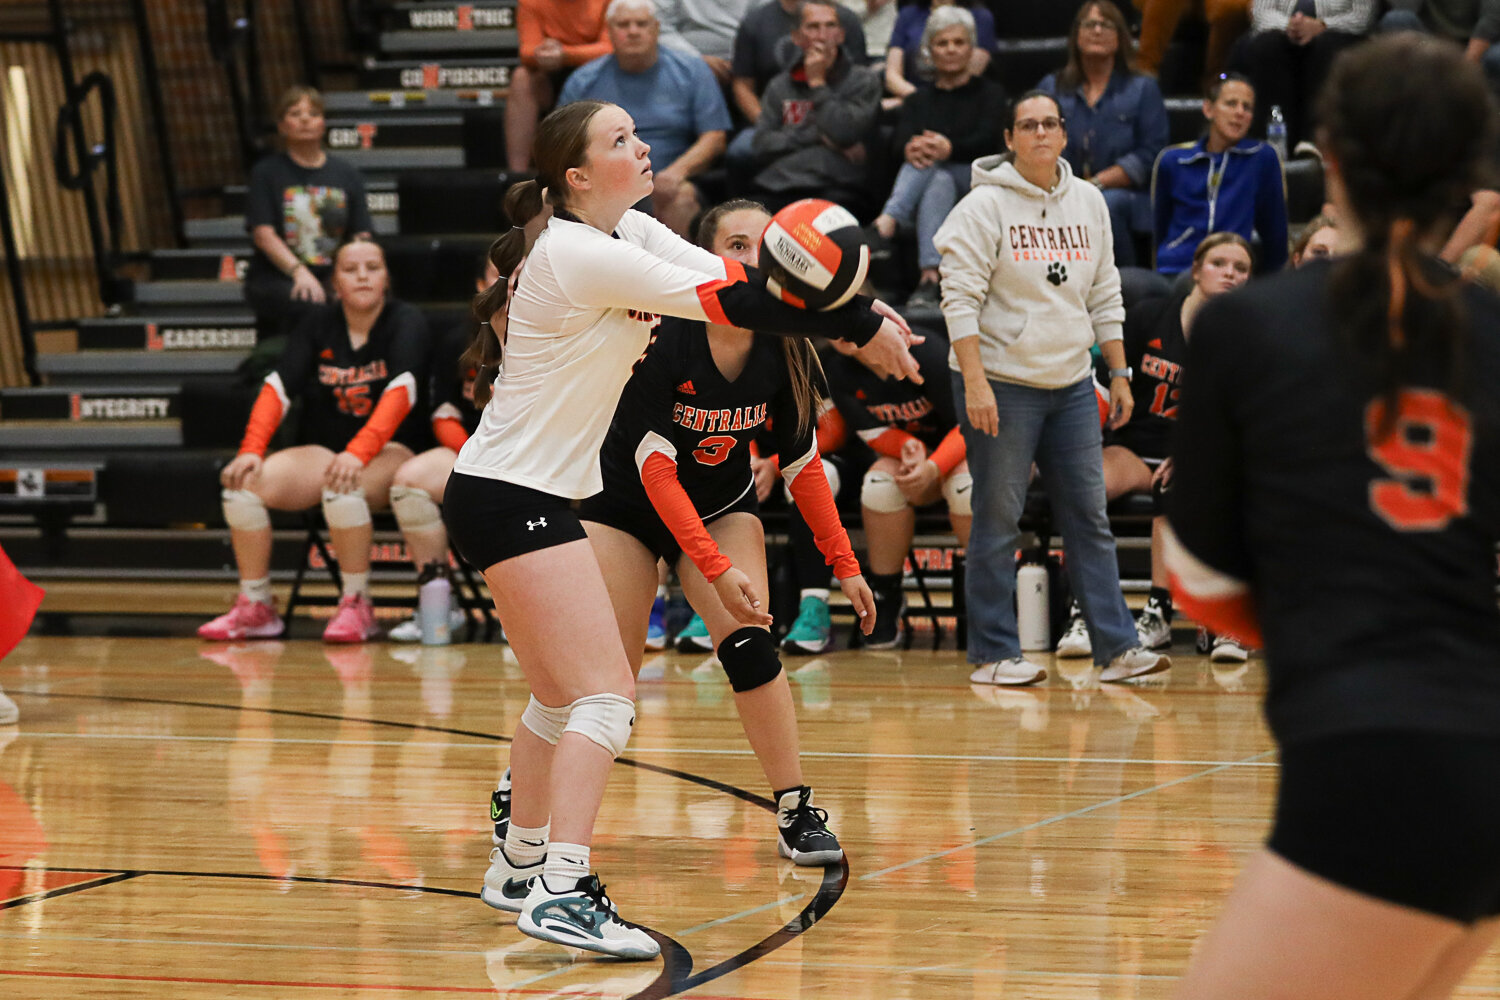 Gracie Schofield digs the ball during Centralia's three-set sweep of W.F. West on Sept. 21.